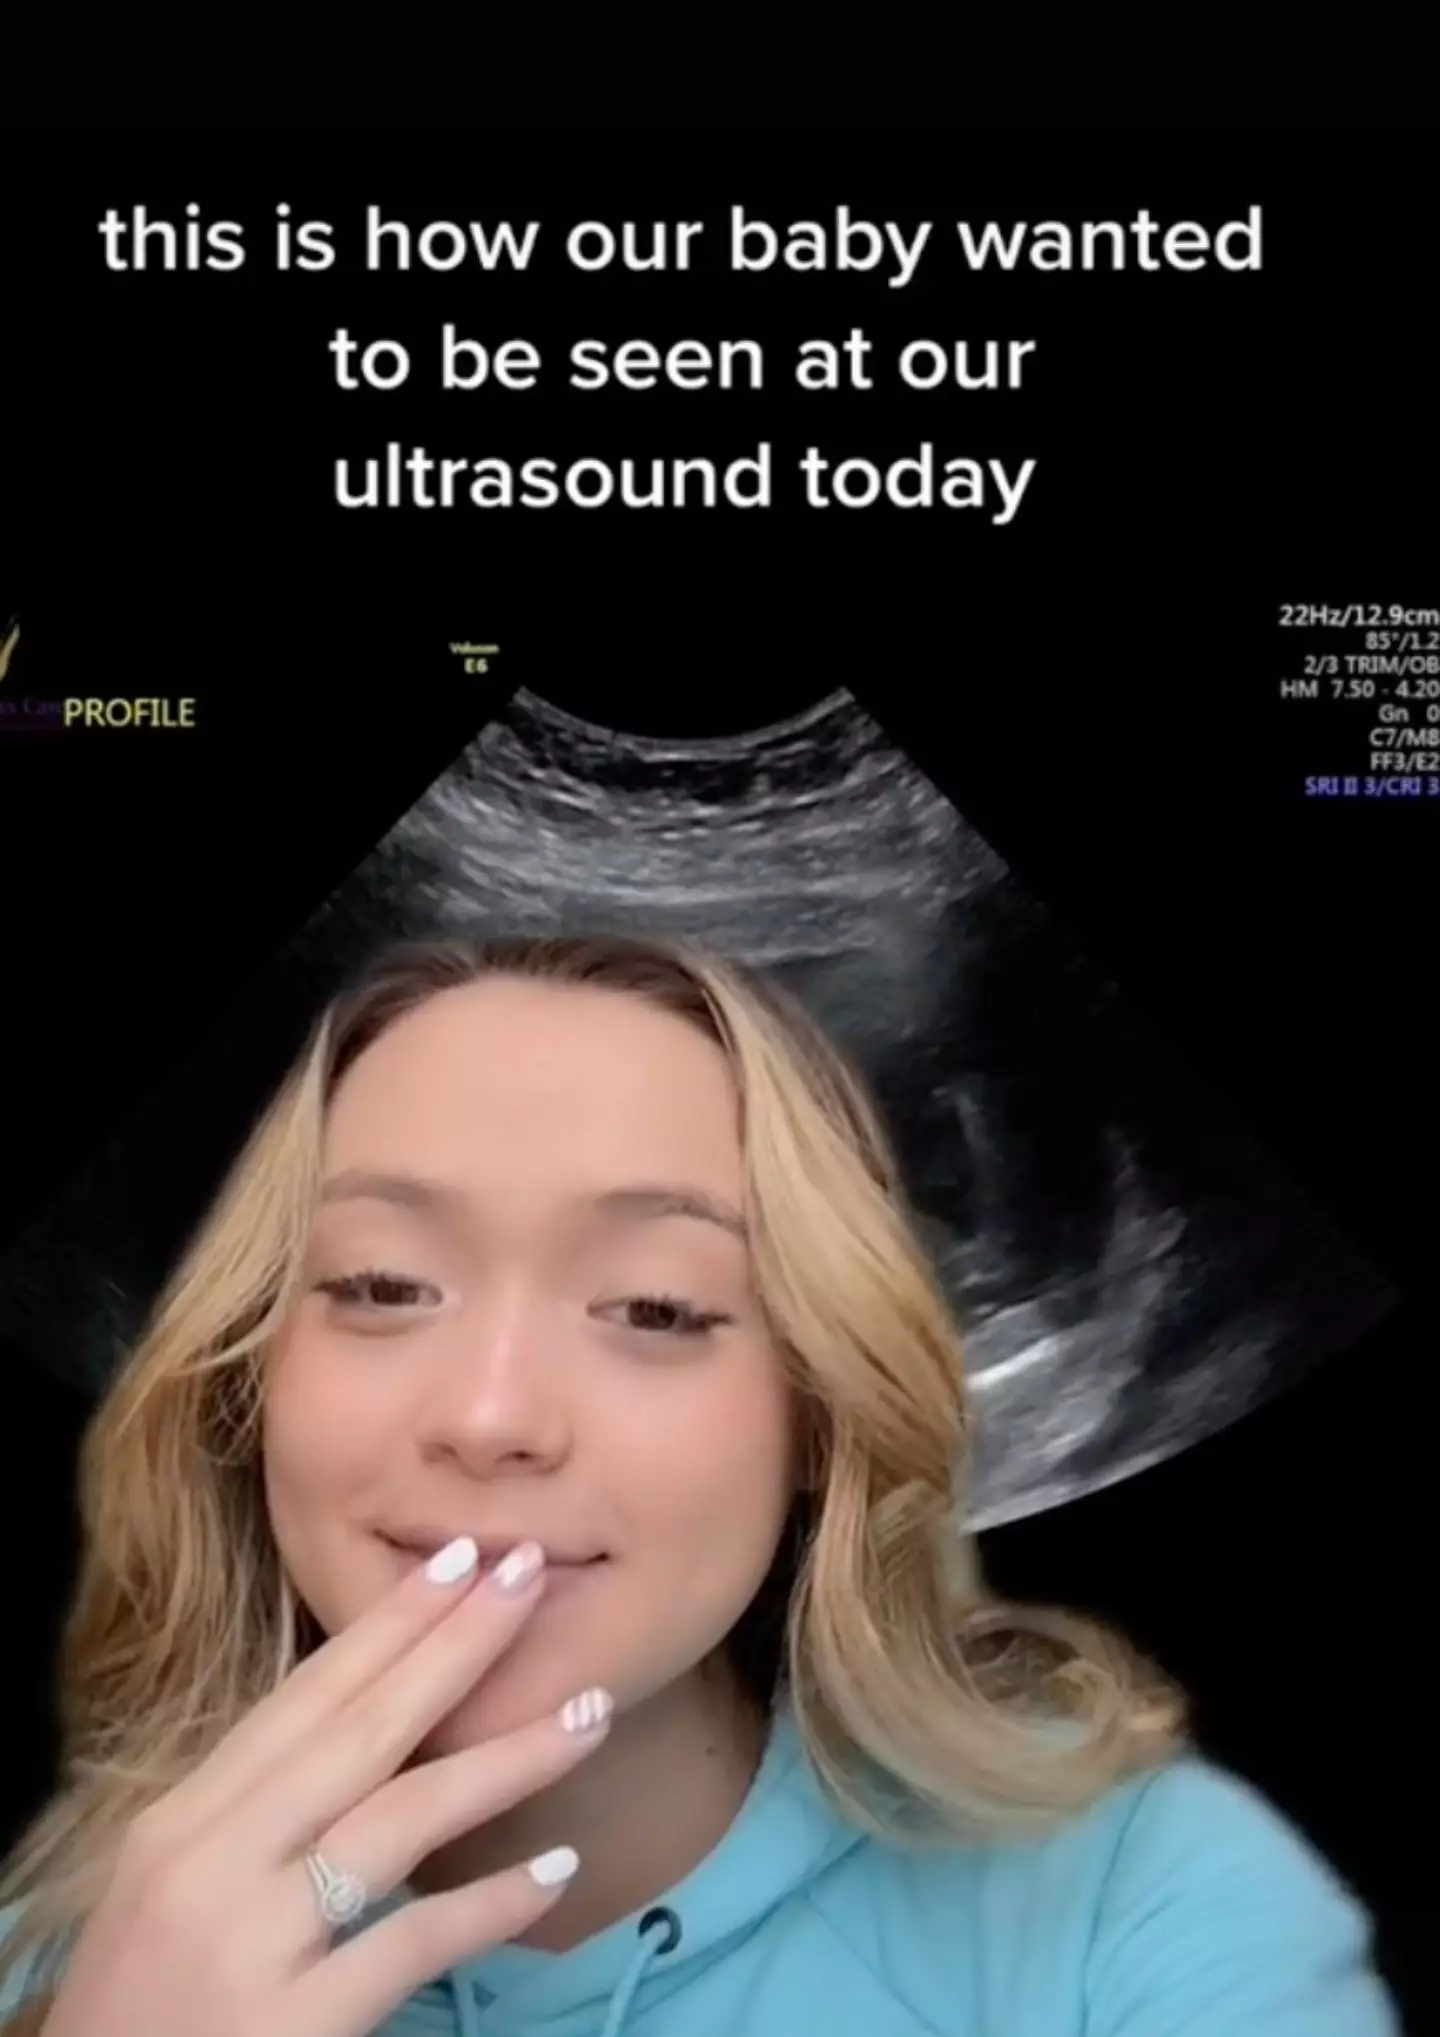 The mum-to-be was not expecting her ultrasound to look like that. (